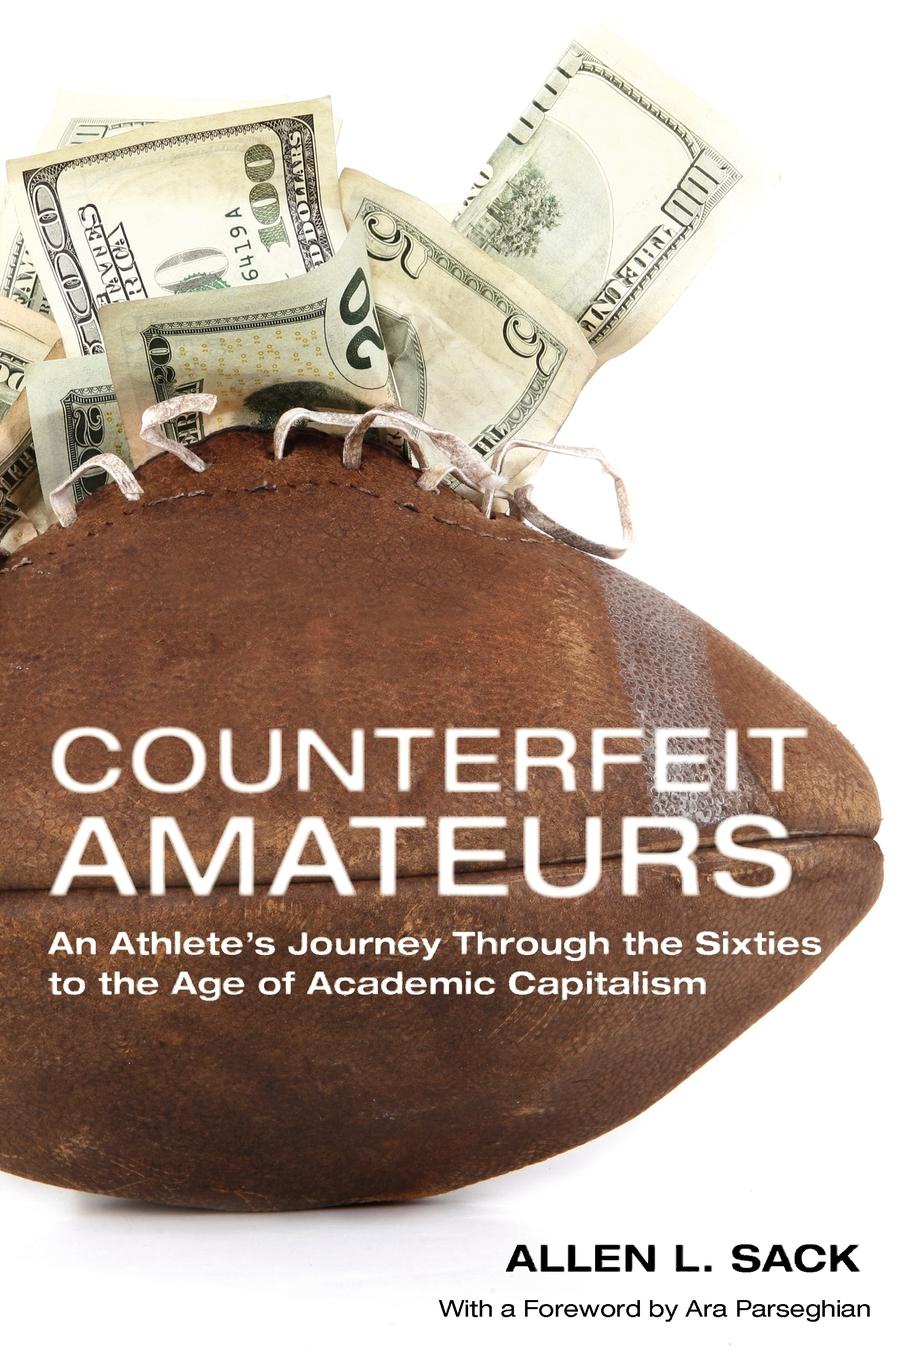 Counterfeit Amateurs. An Athlete`s Journey Through the Sixties to the Age of Academic Capitalism